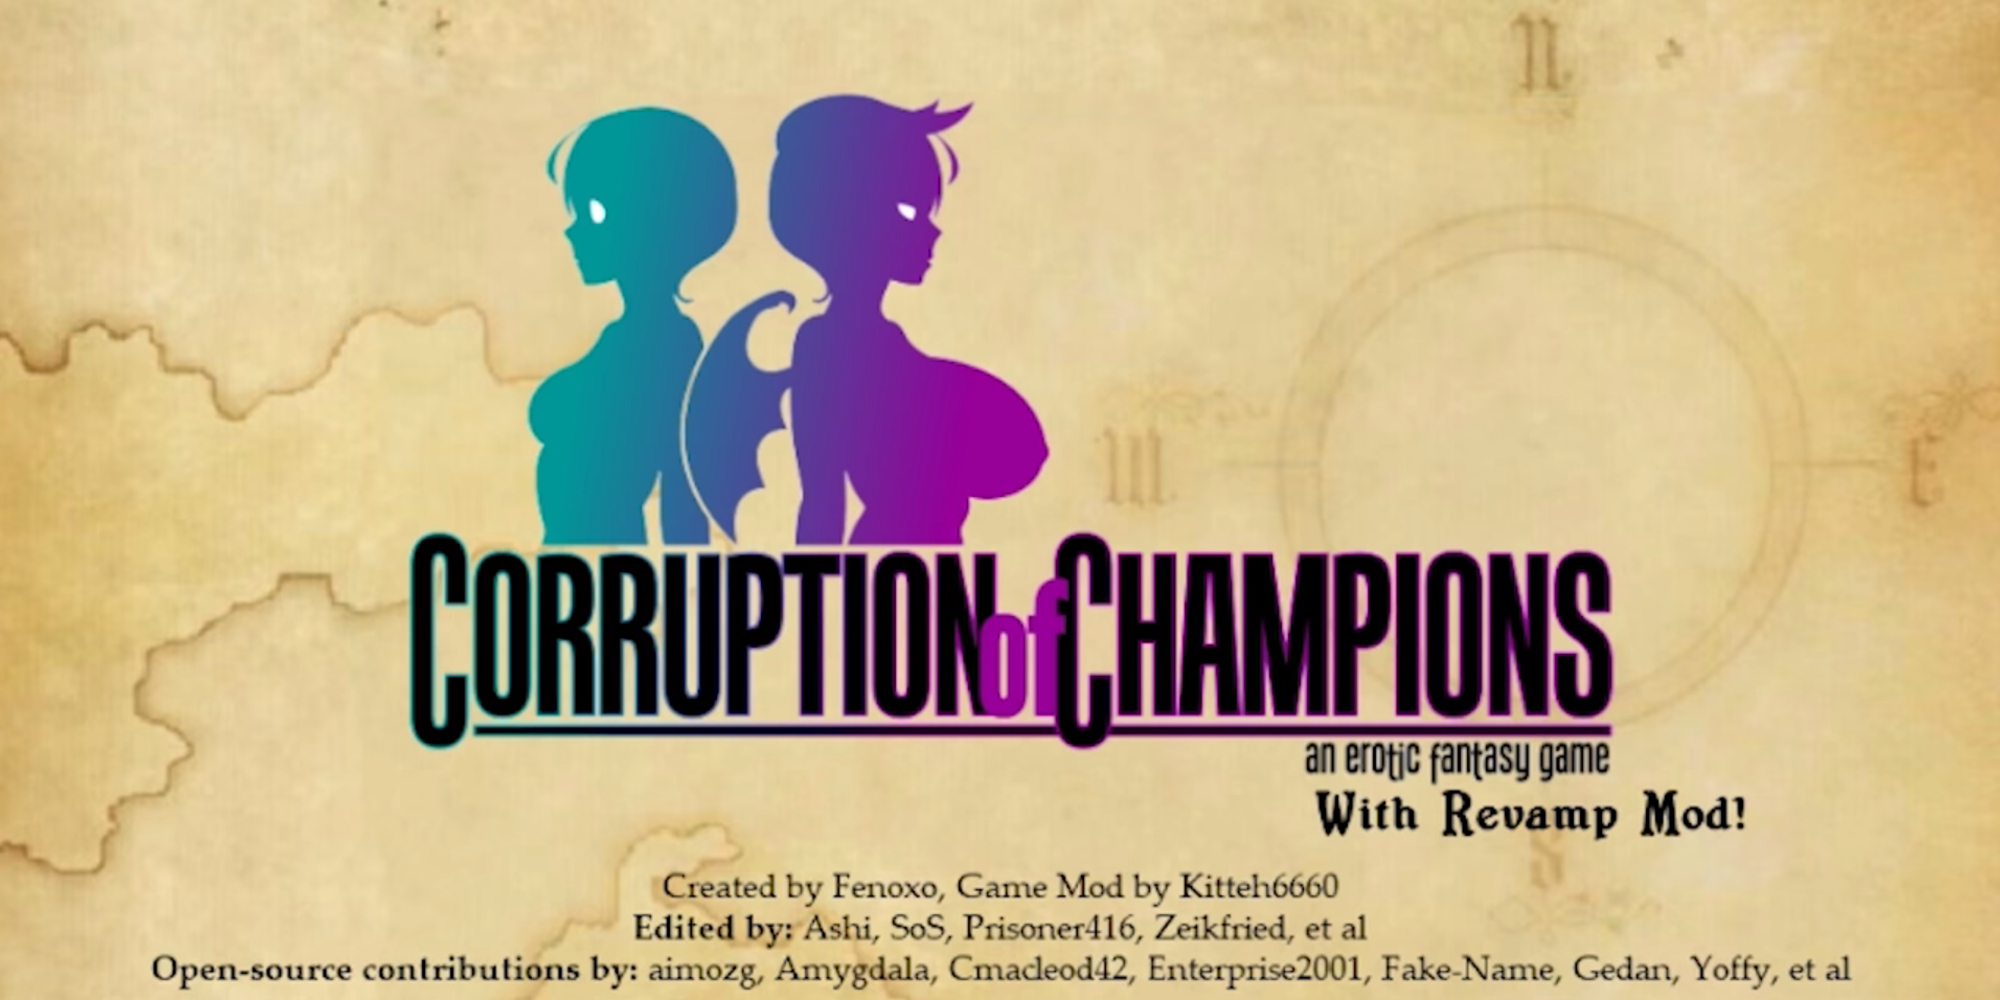 how to corruption of champions mod